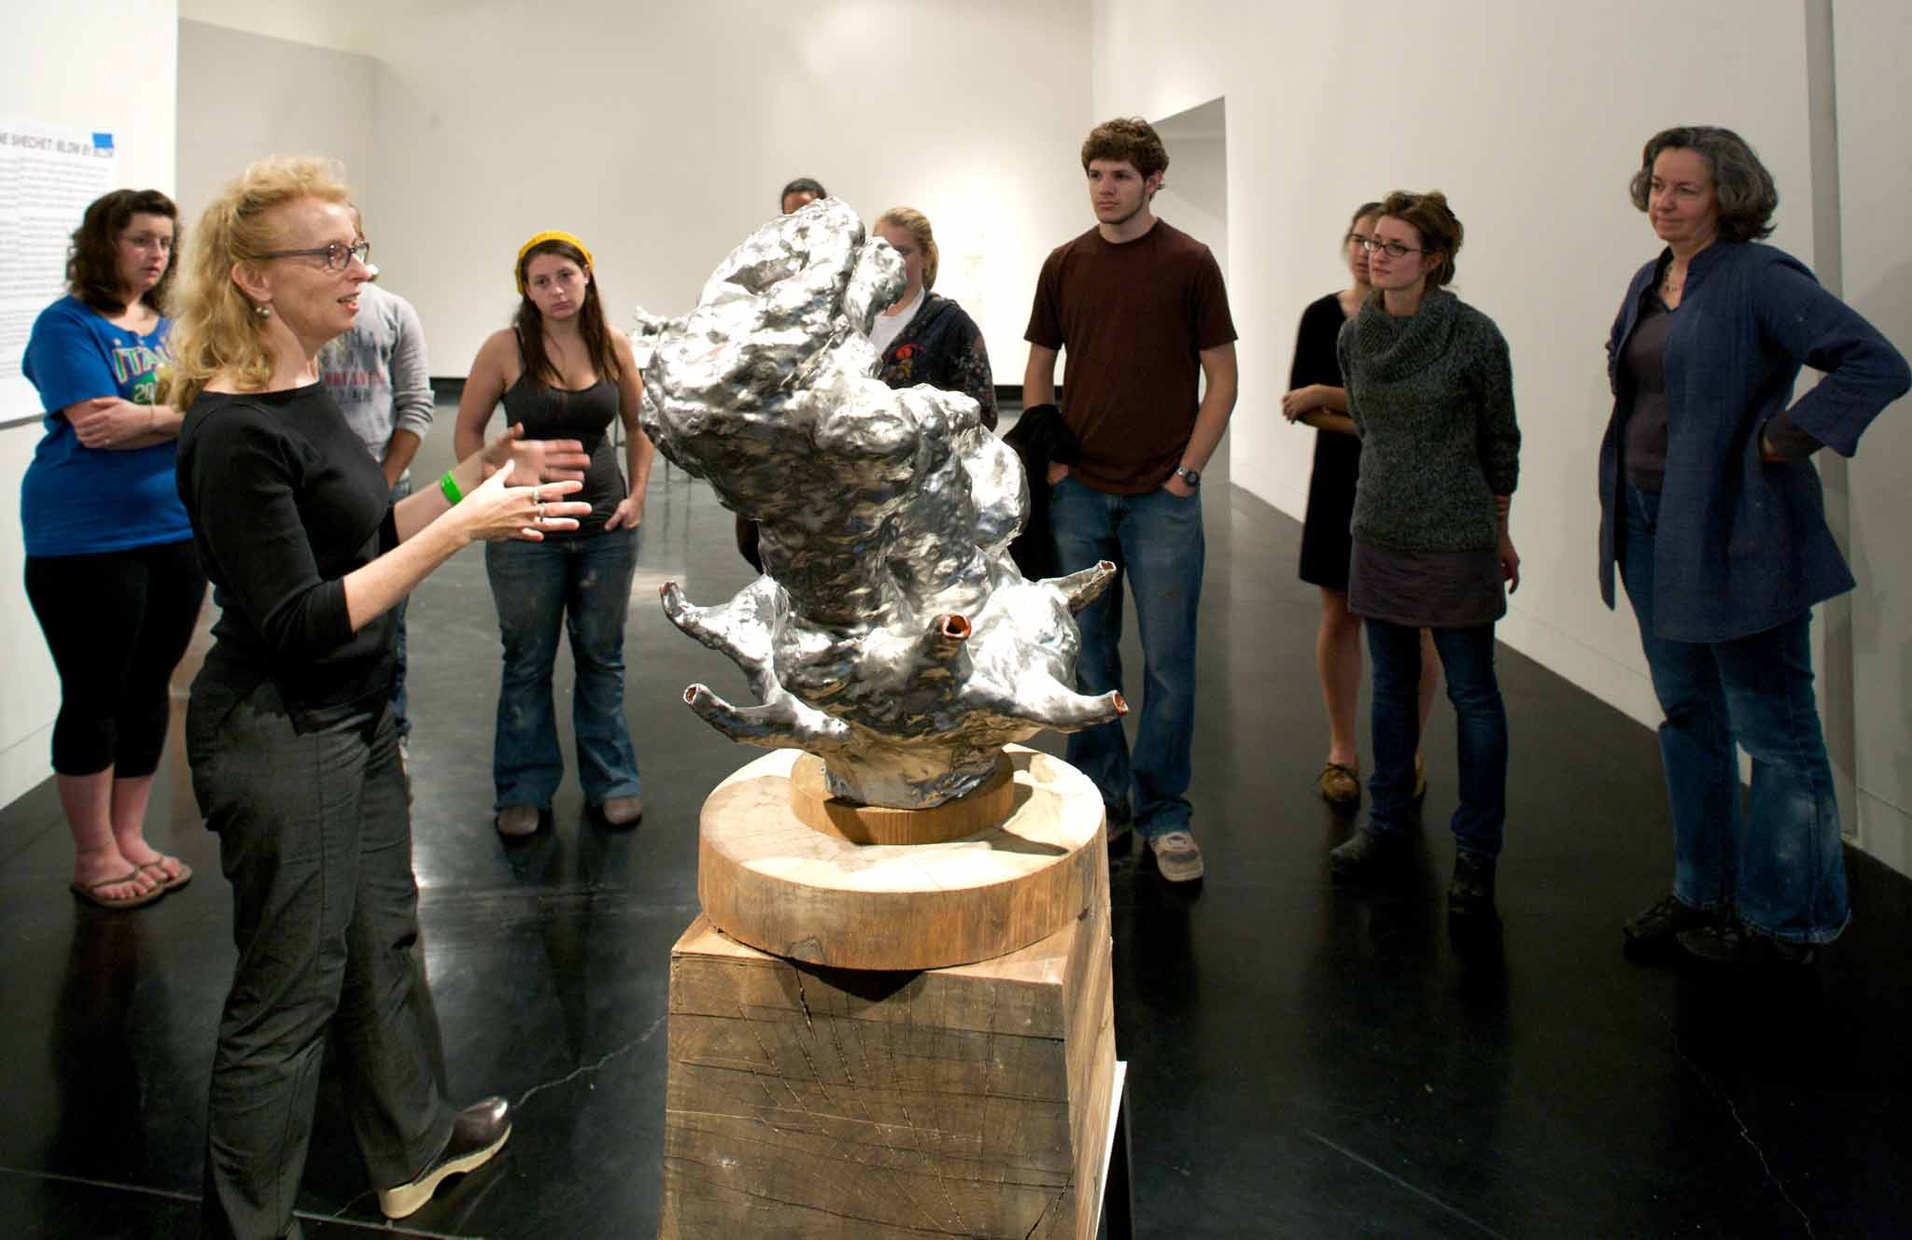 A group of people gather around an abstract, silver sculpture on a wooden pedestal.